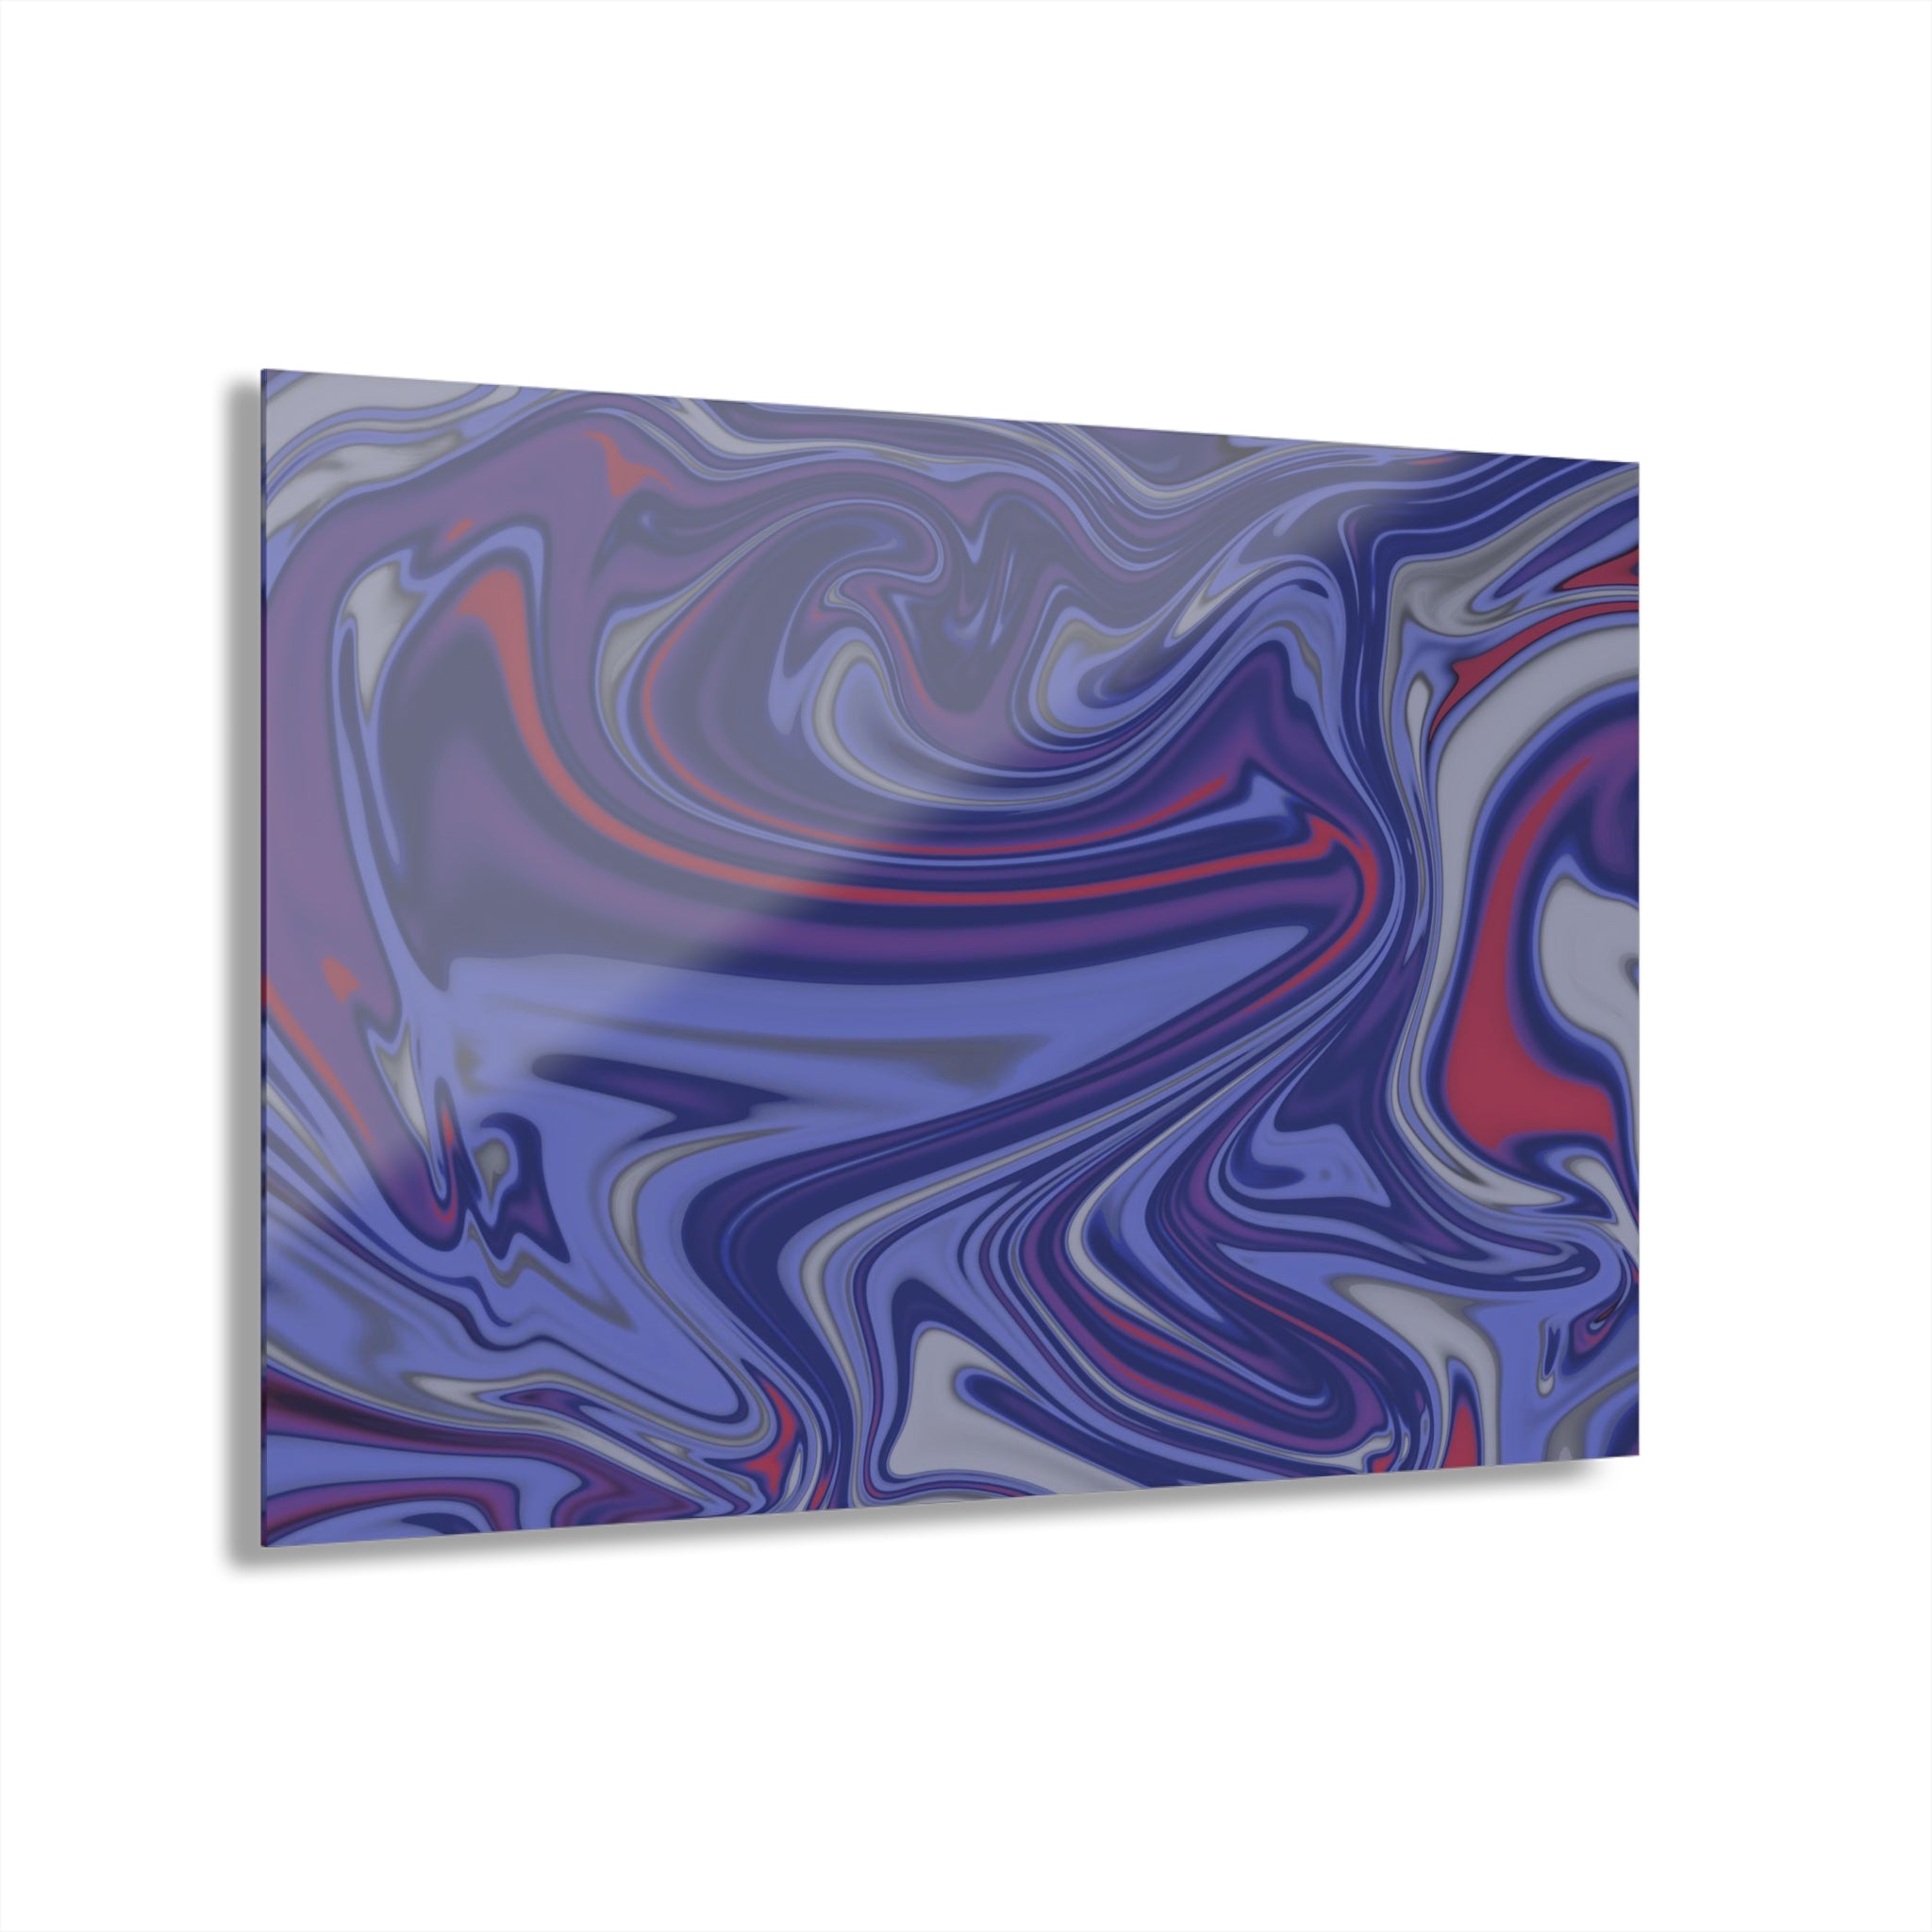 Have A Good Trip Acrylic Print | 36x24 Inch | Fluid Abstract | Contemporary Wall Art